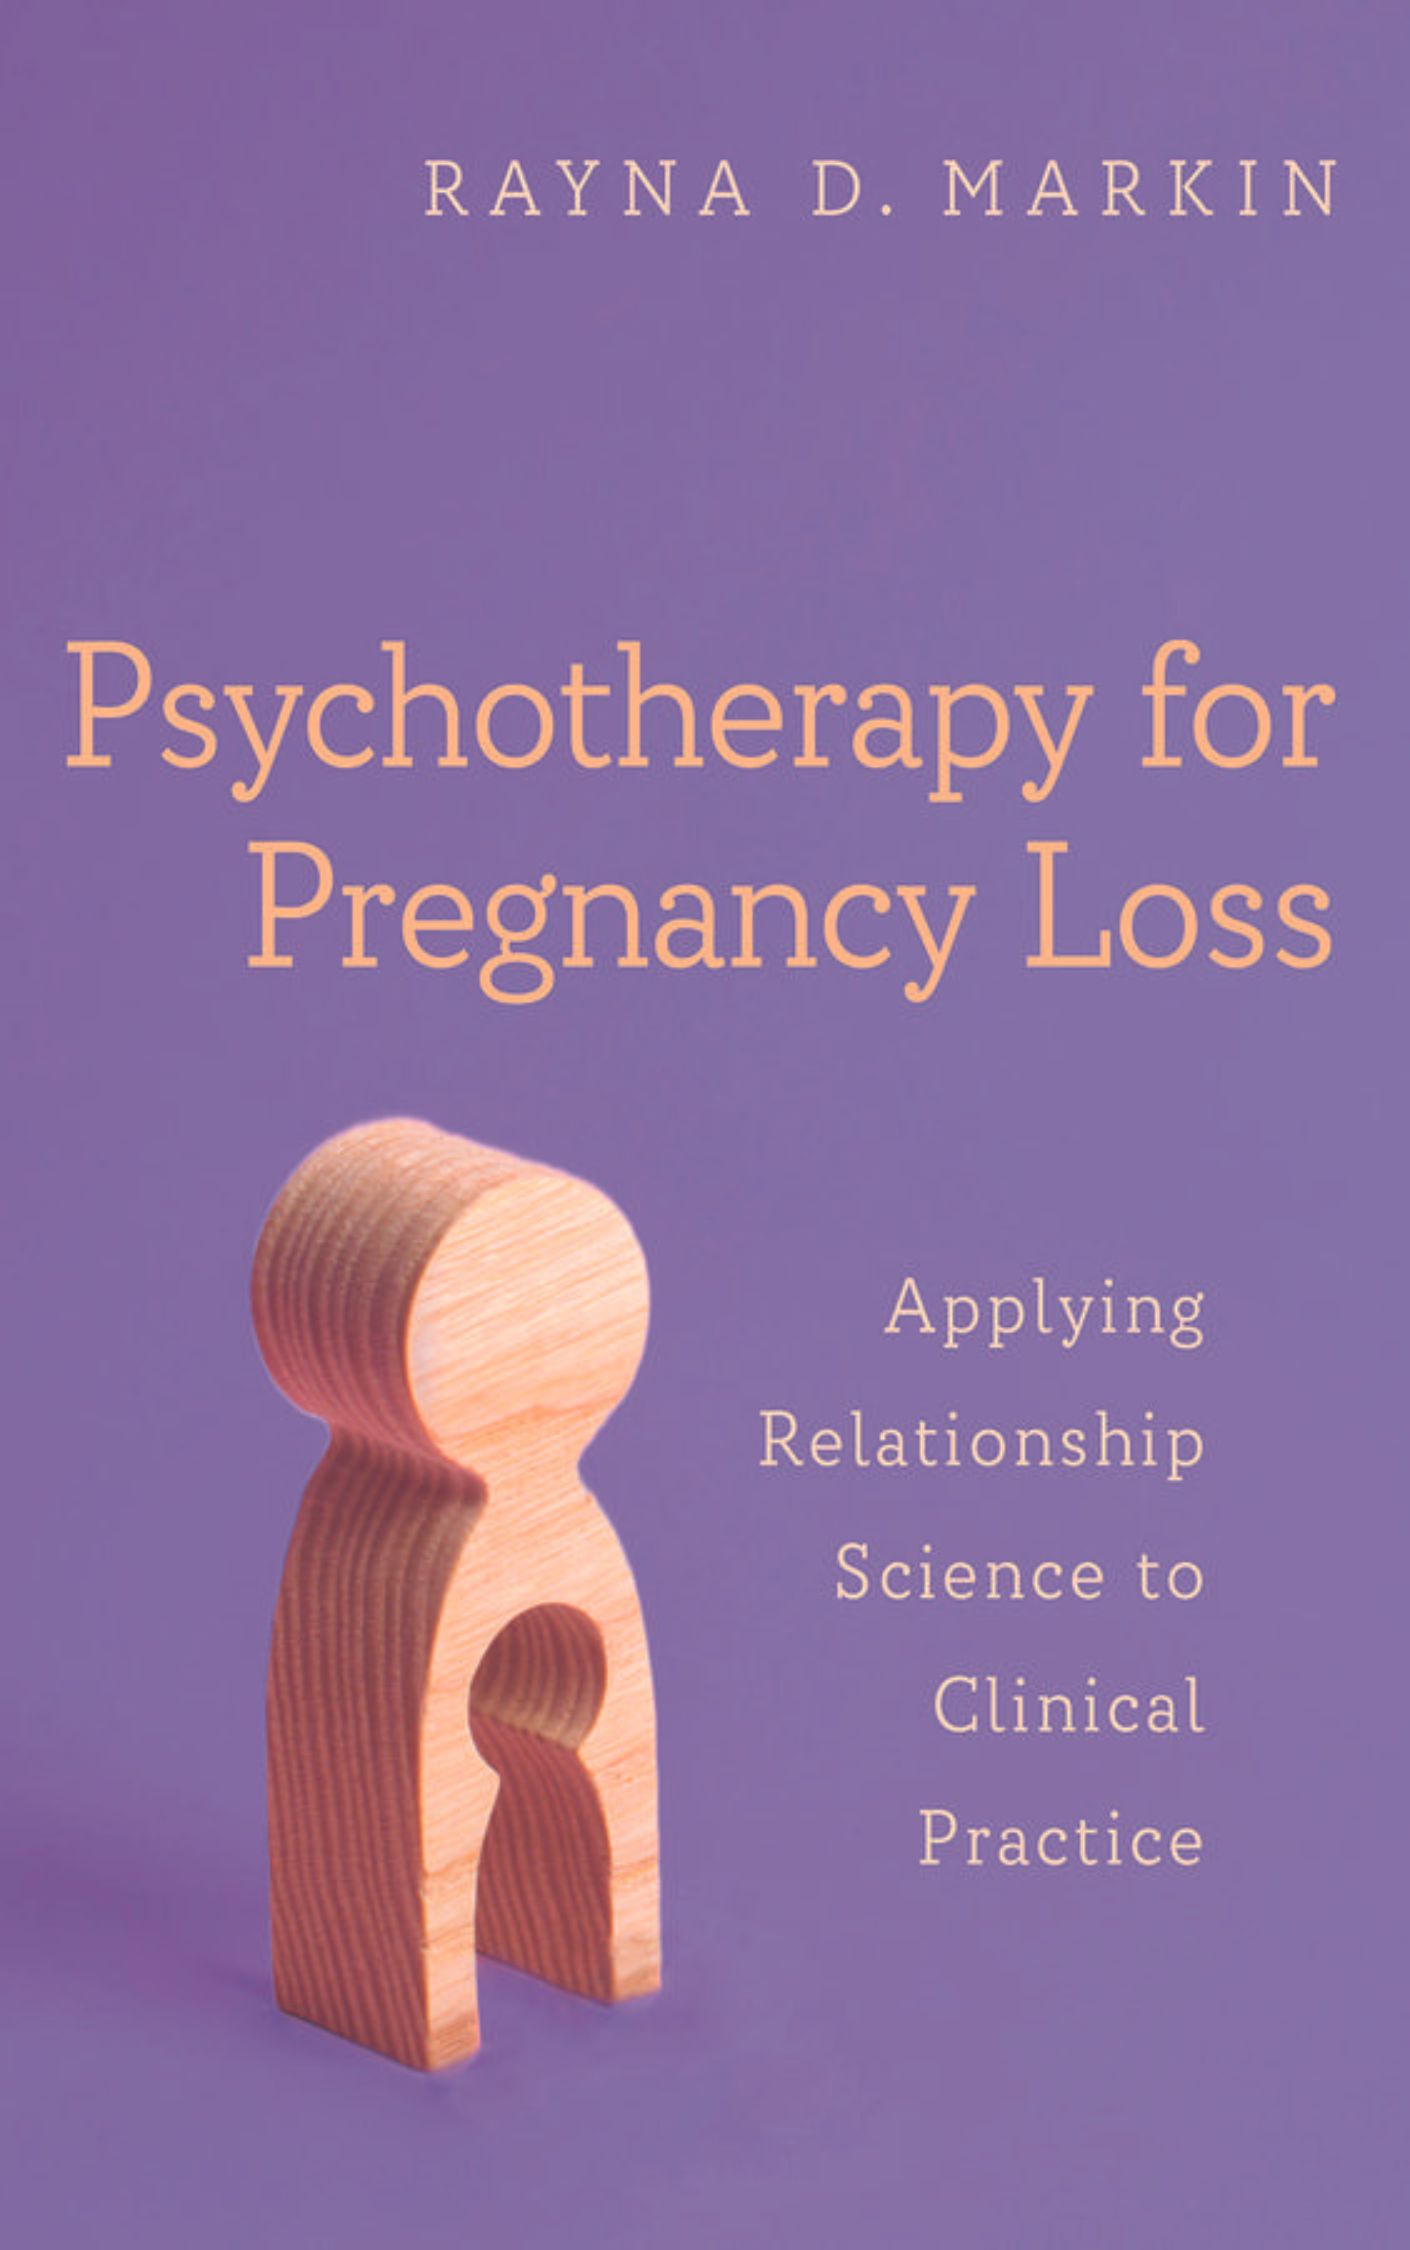 therapy for pregnancy loss, rayna markin